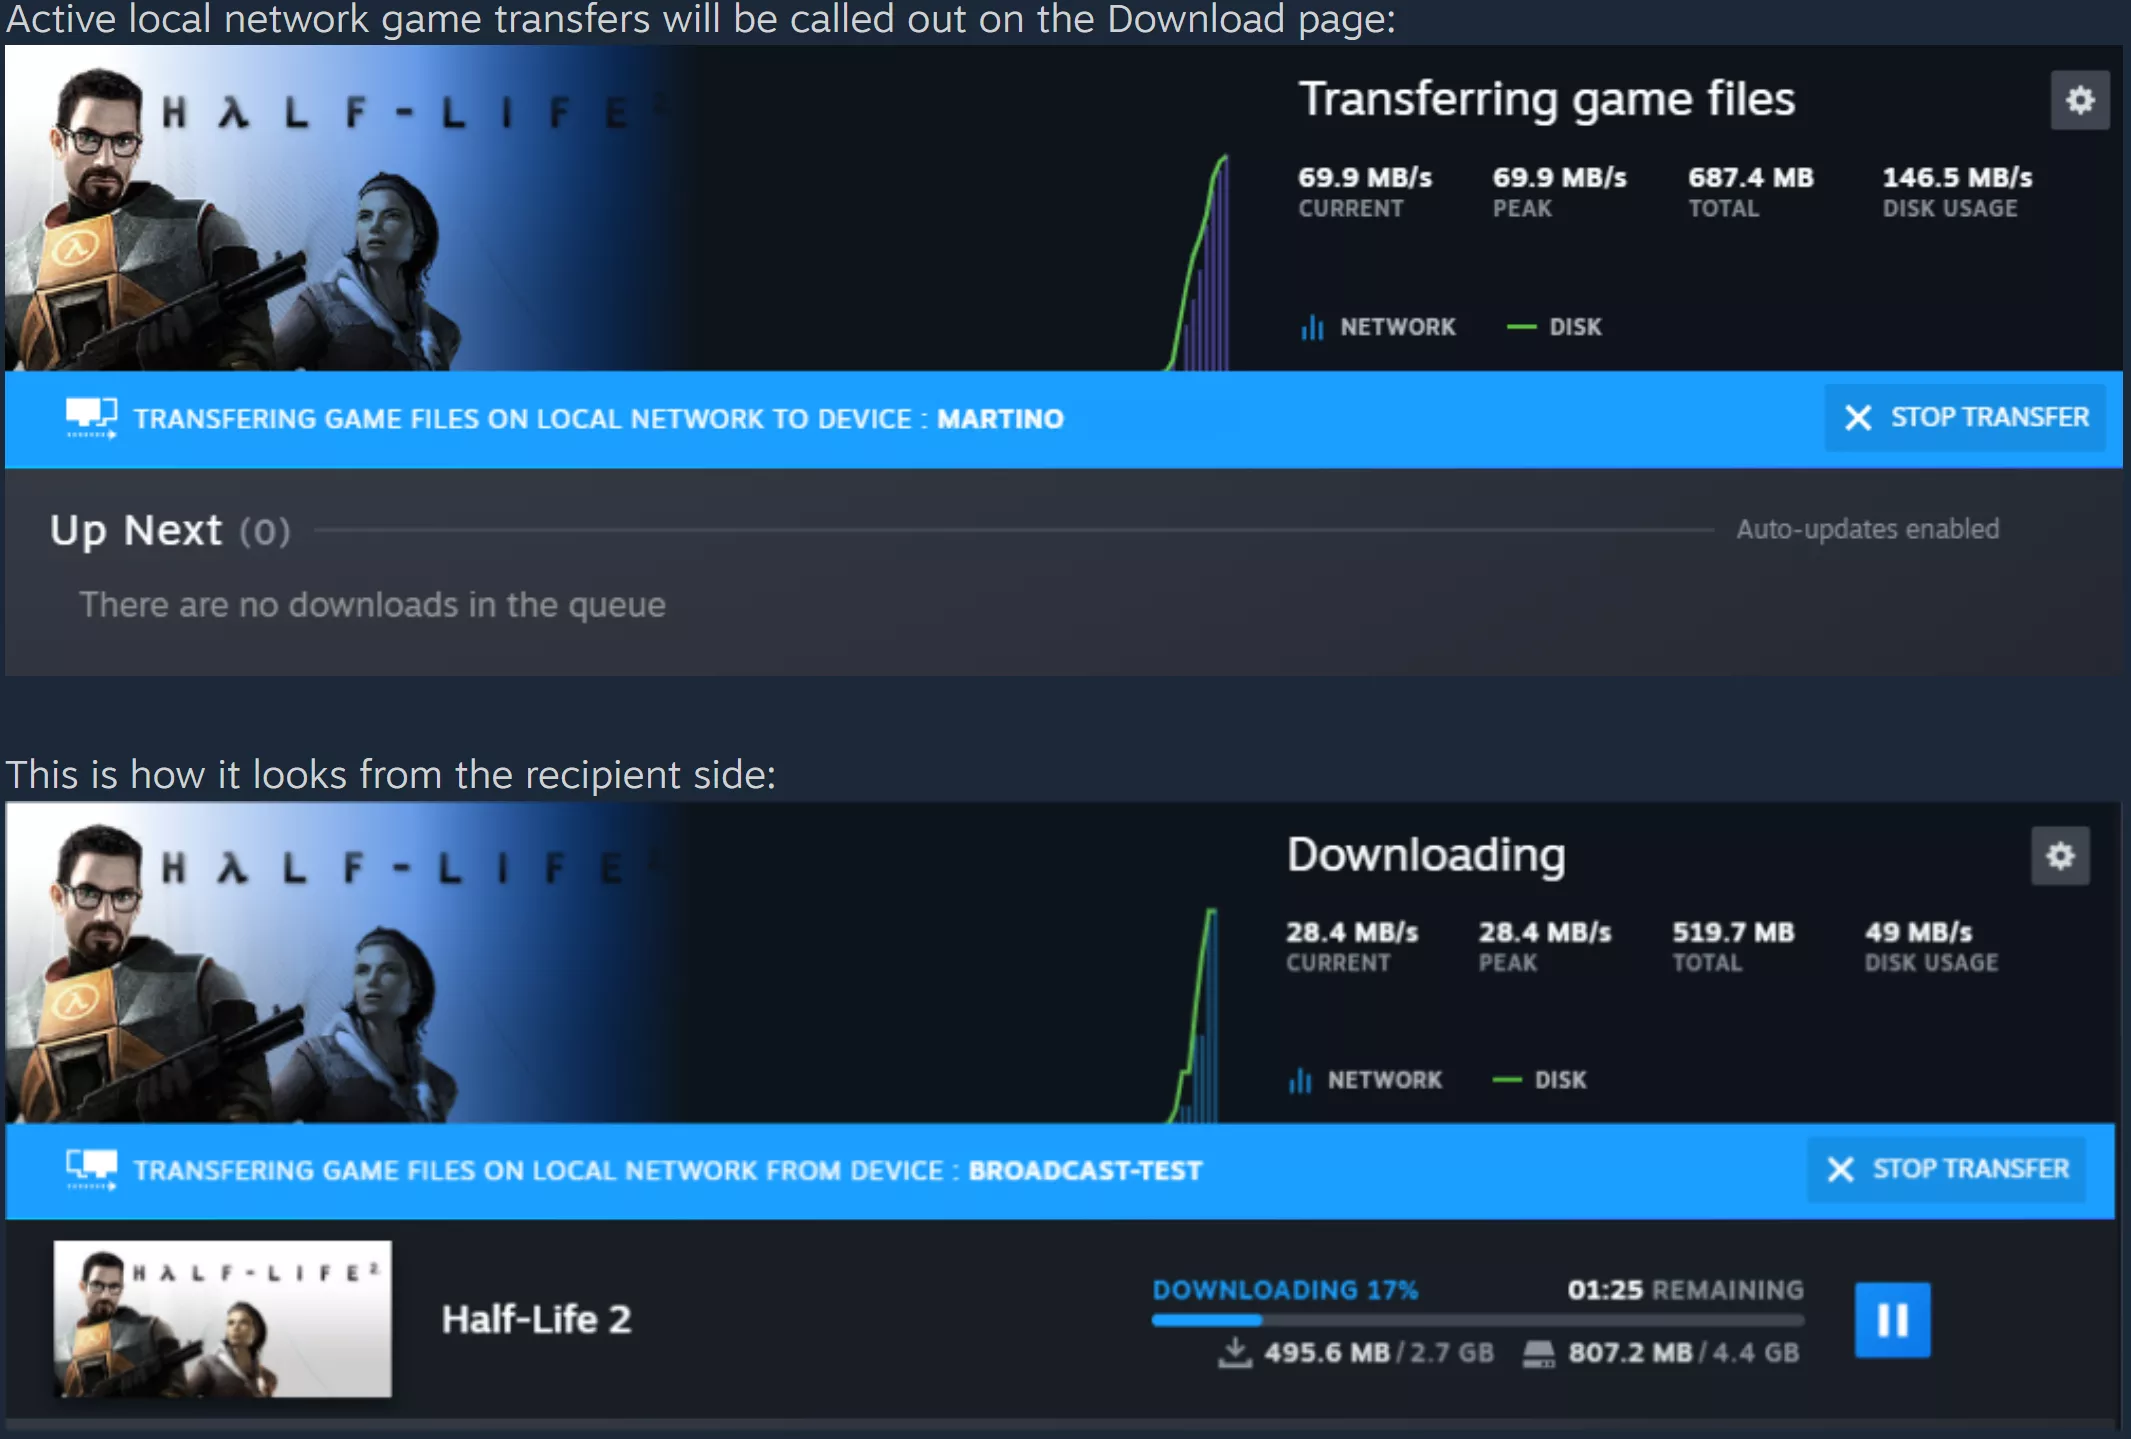 Steam now allows peer-to-peer game transfers over LAN